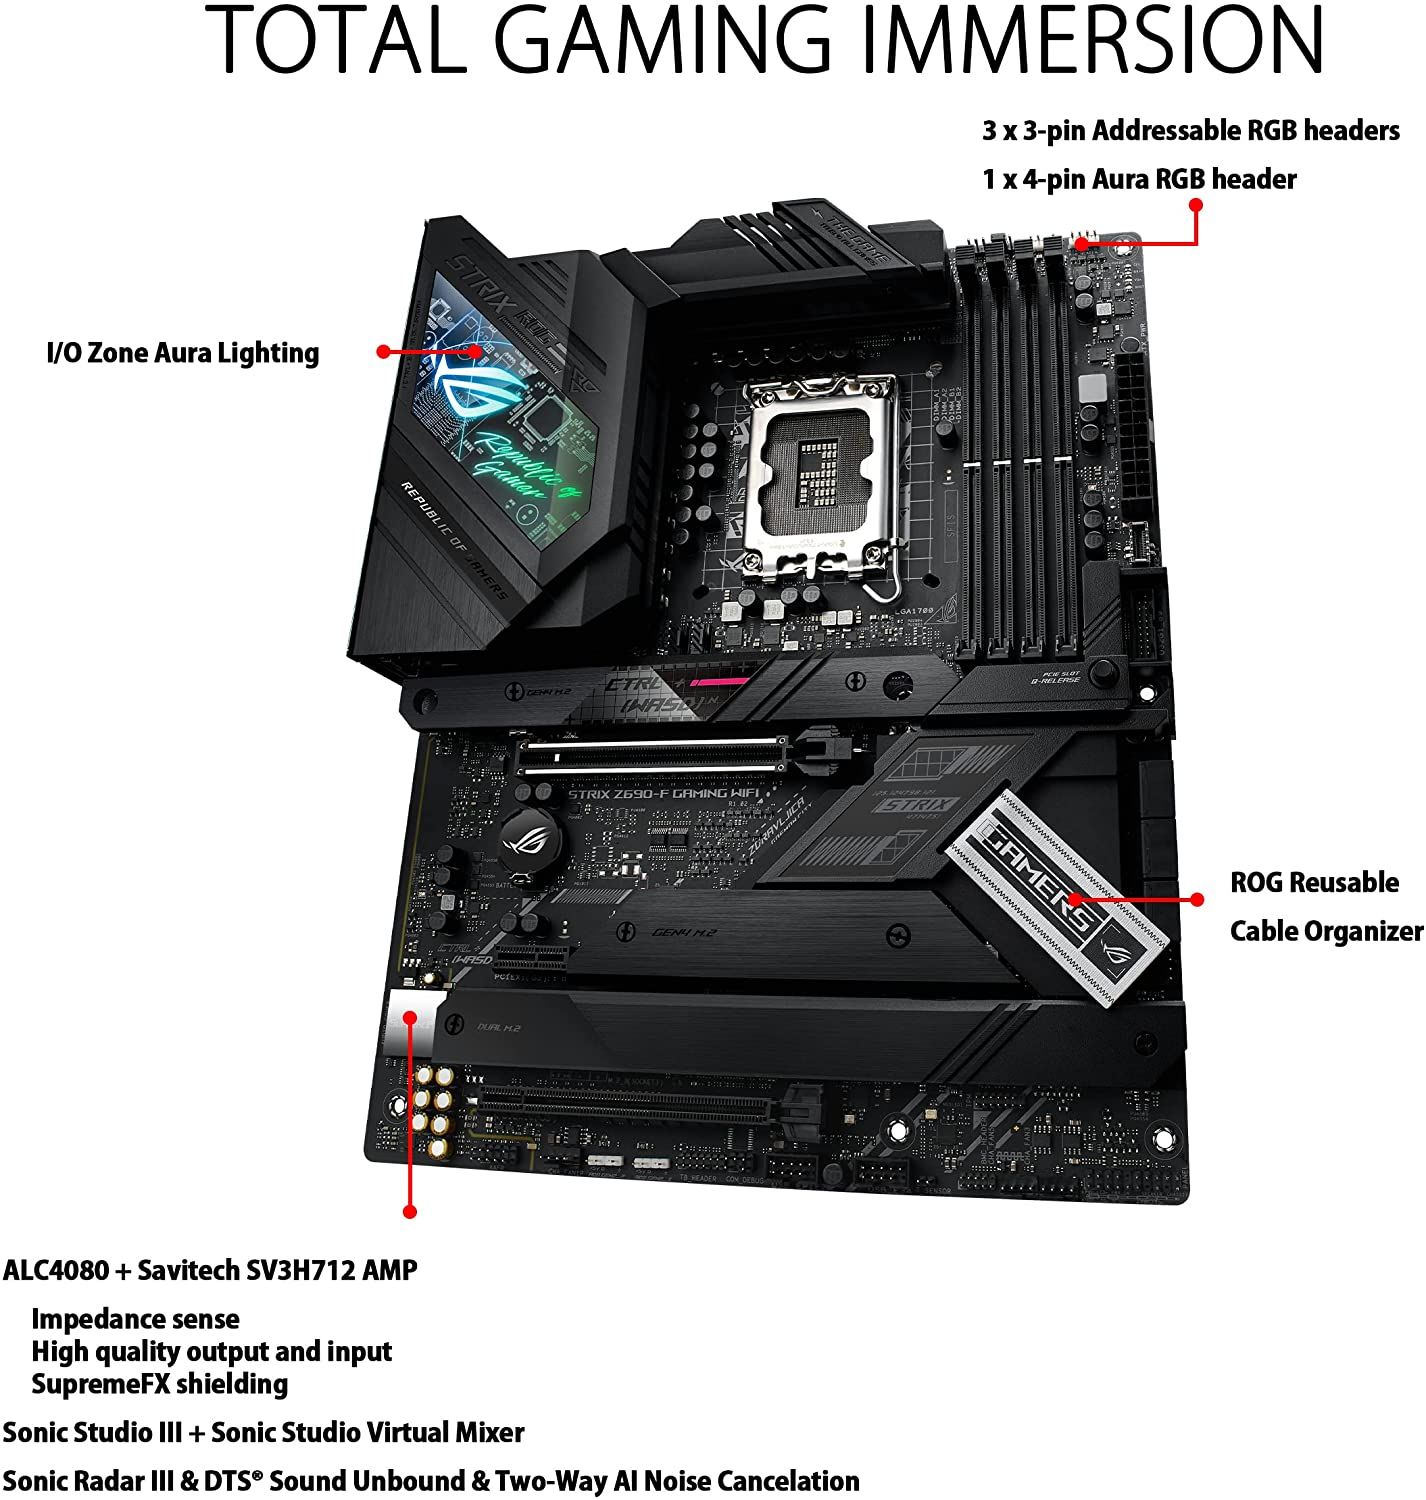 An image showing the dedicated gaming features of ASUS ROG Strix Z690-F